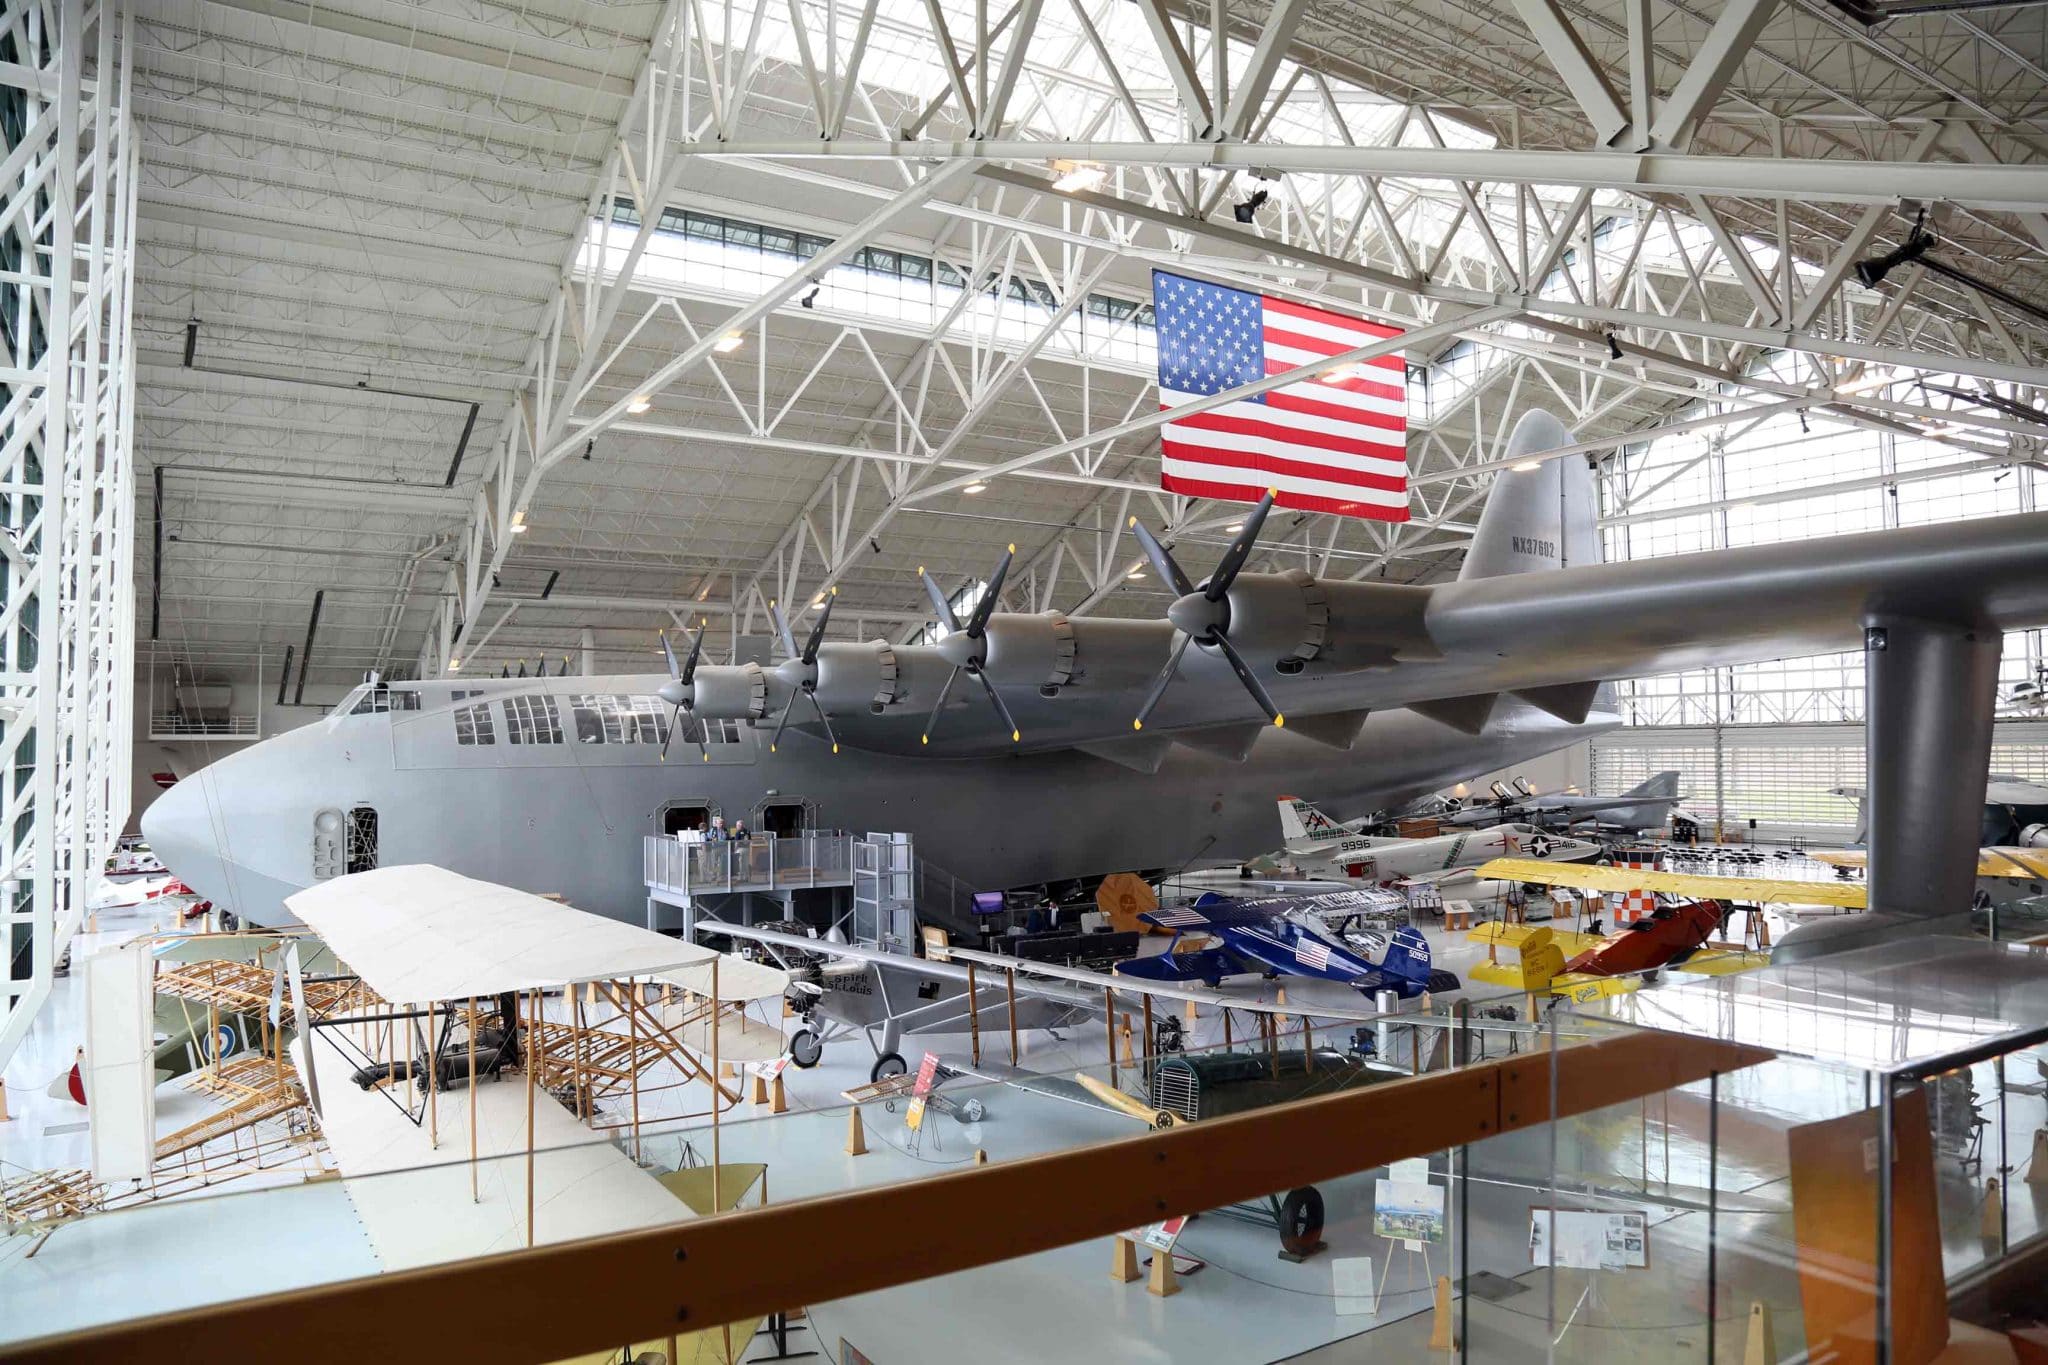 The Spruce Goose at the Air Musuem in McMinnville